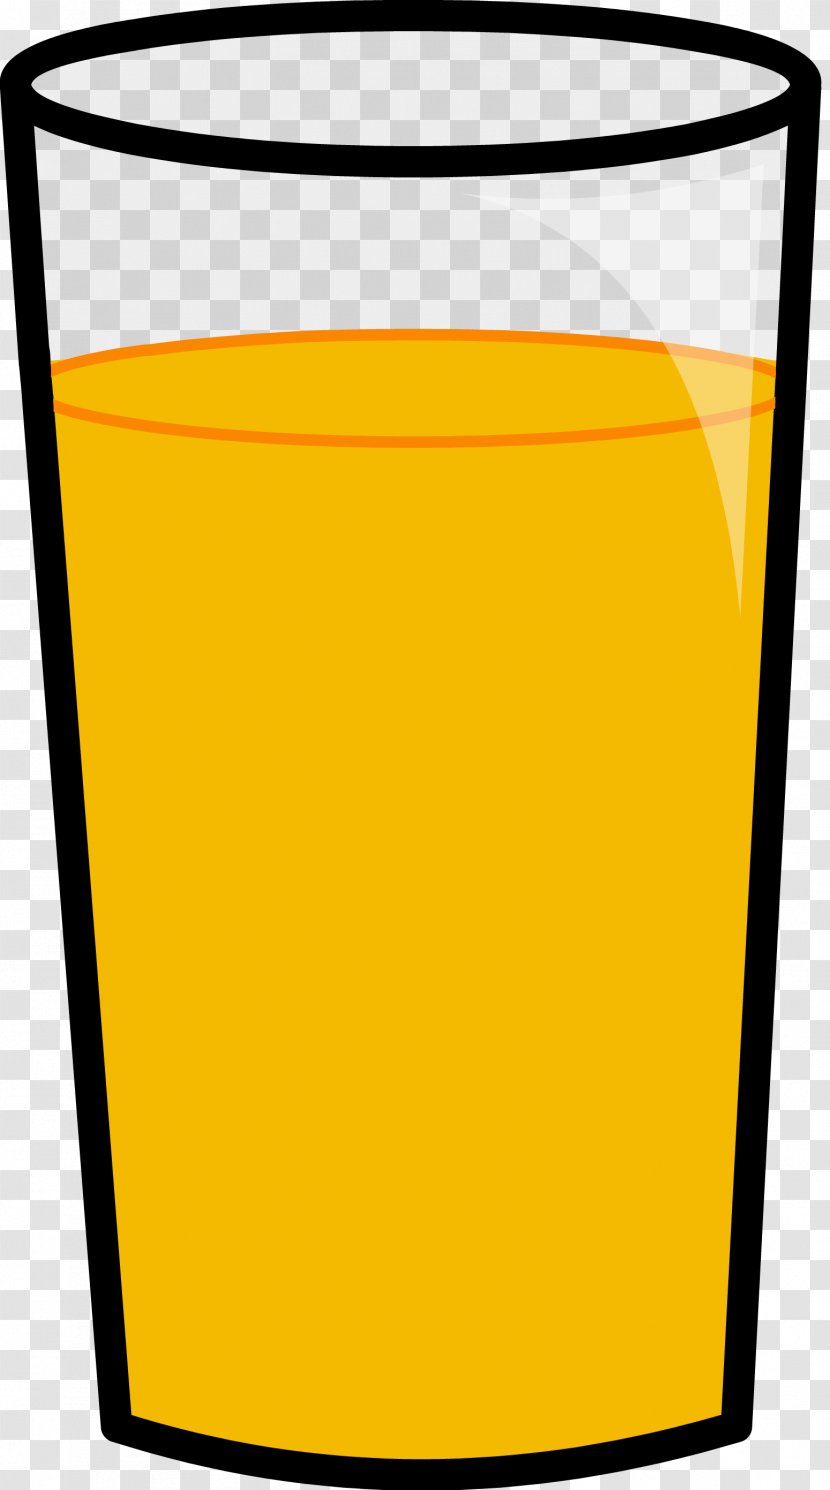 Wikia Clip Art - Pint Us - Object Transparent PNG